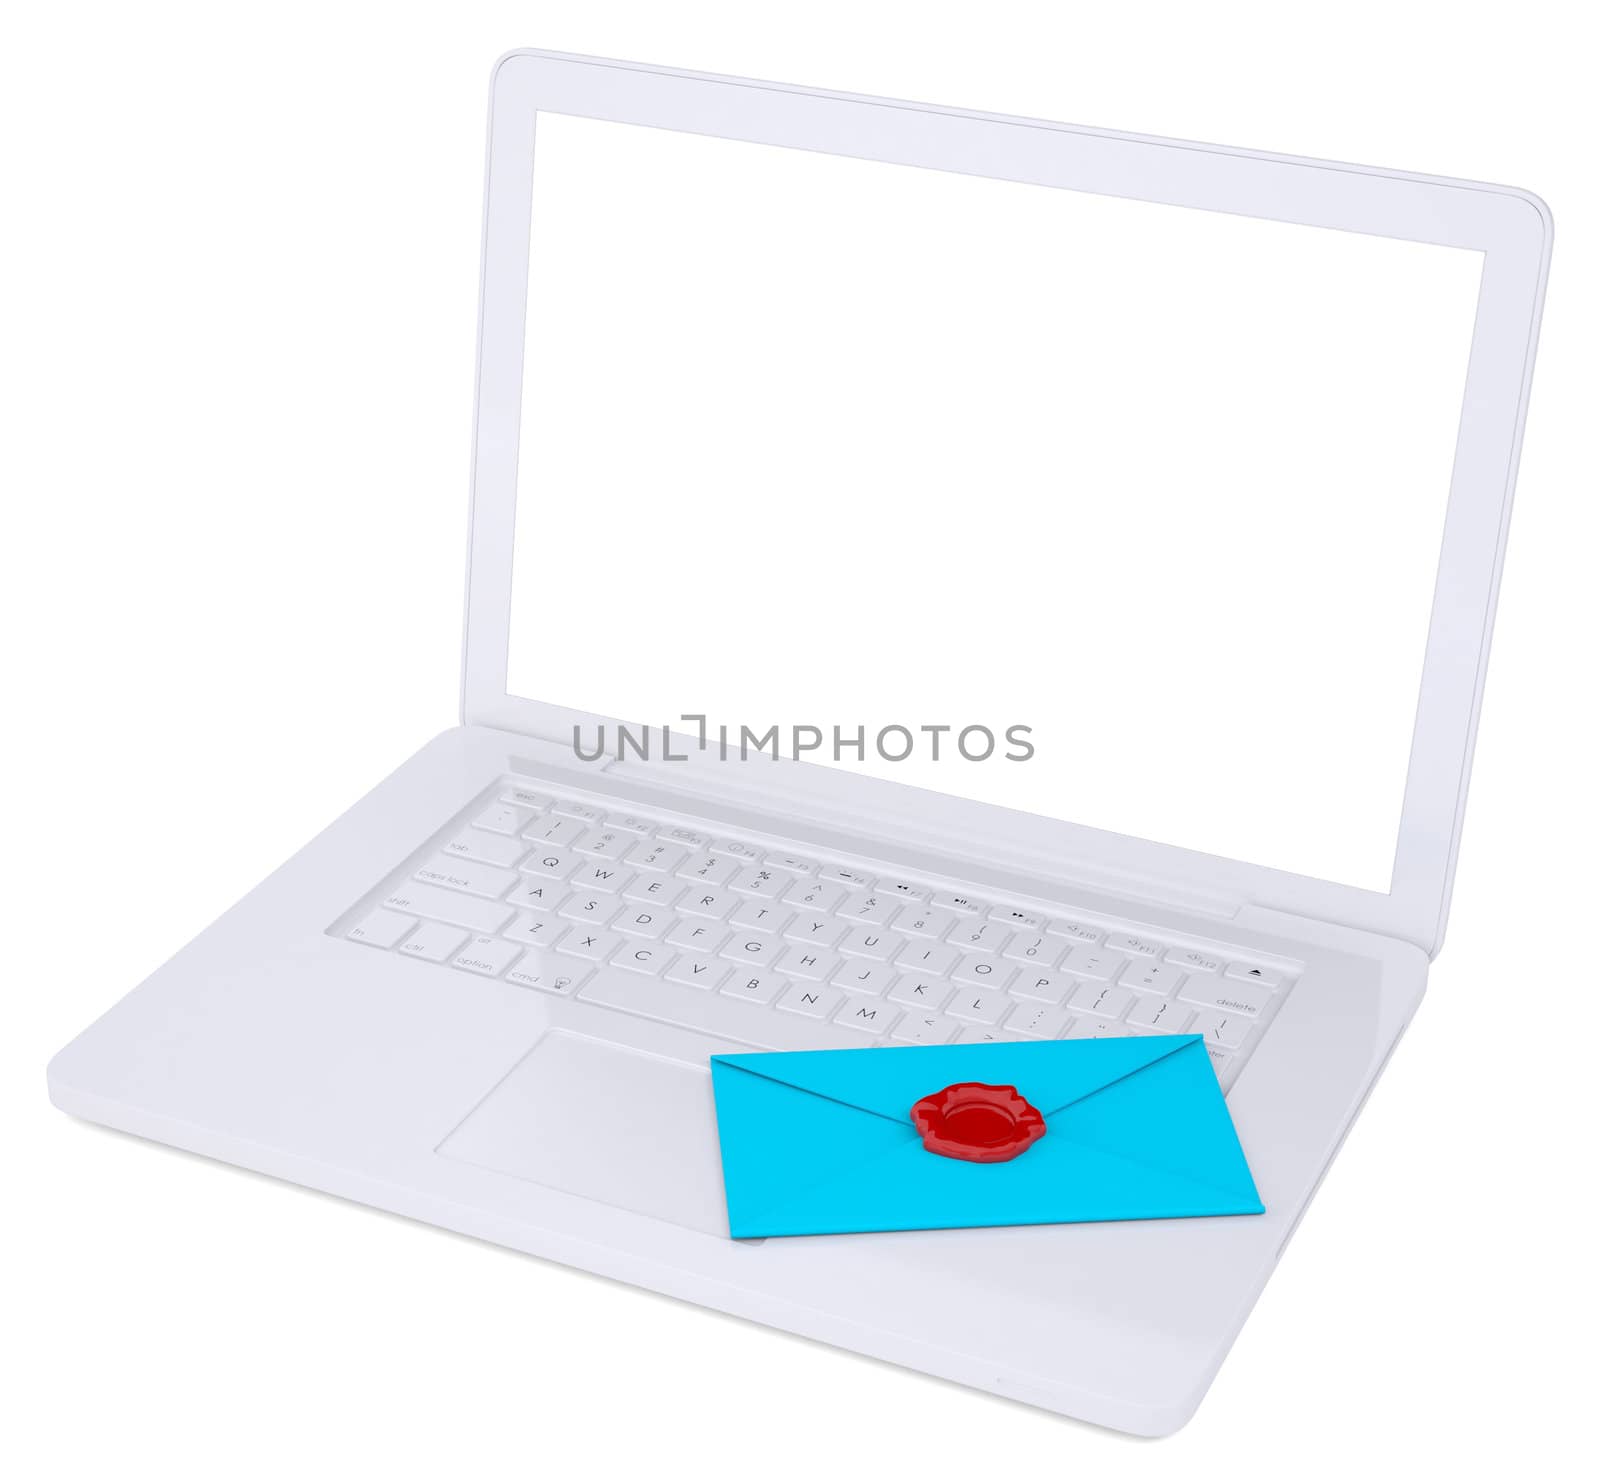 Blue envelope and a laptop by cherezoff